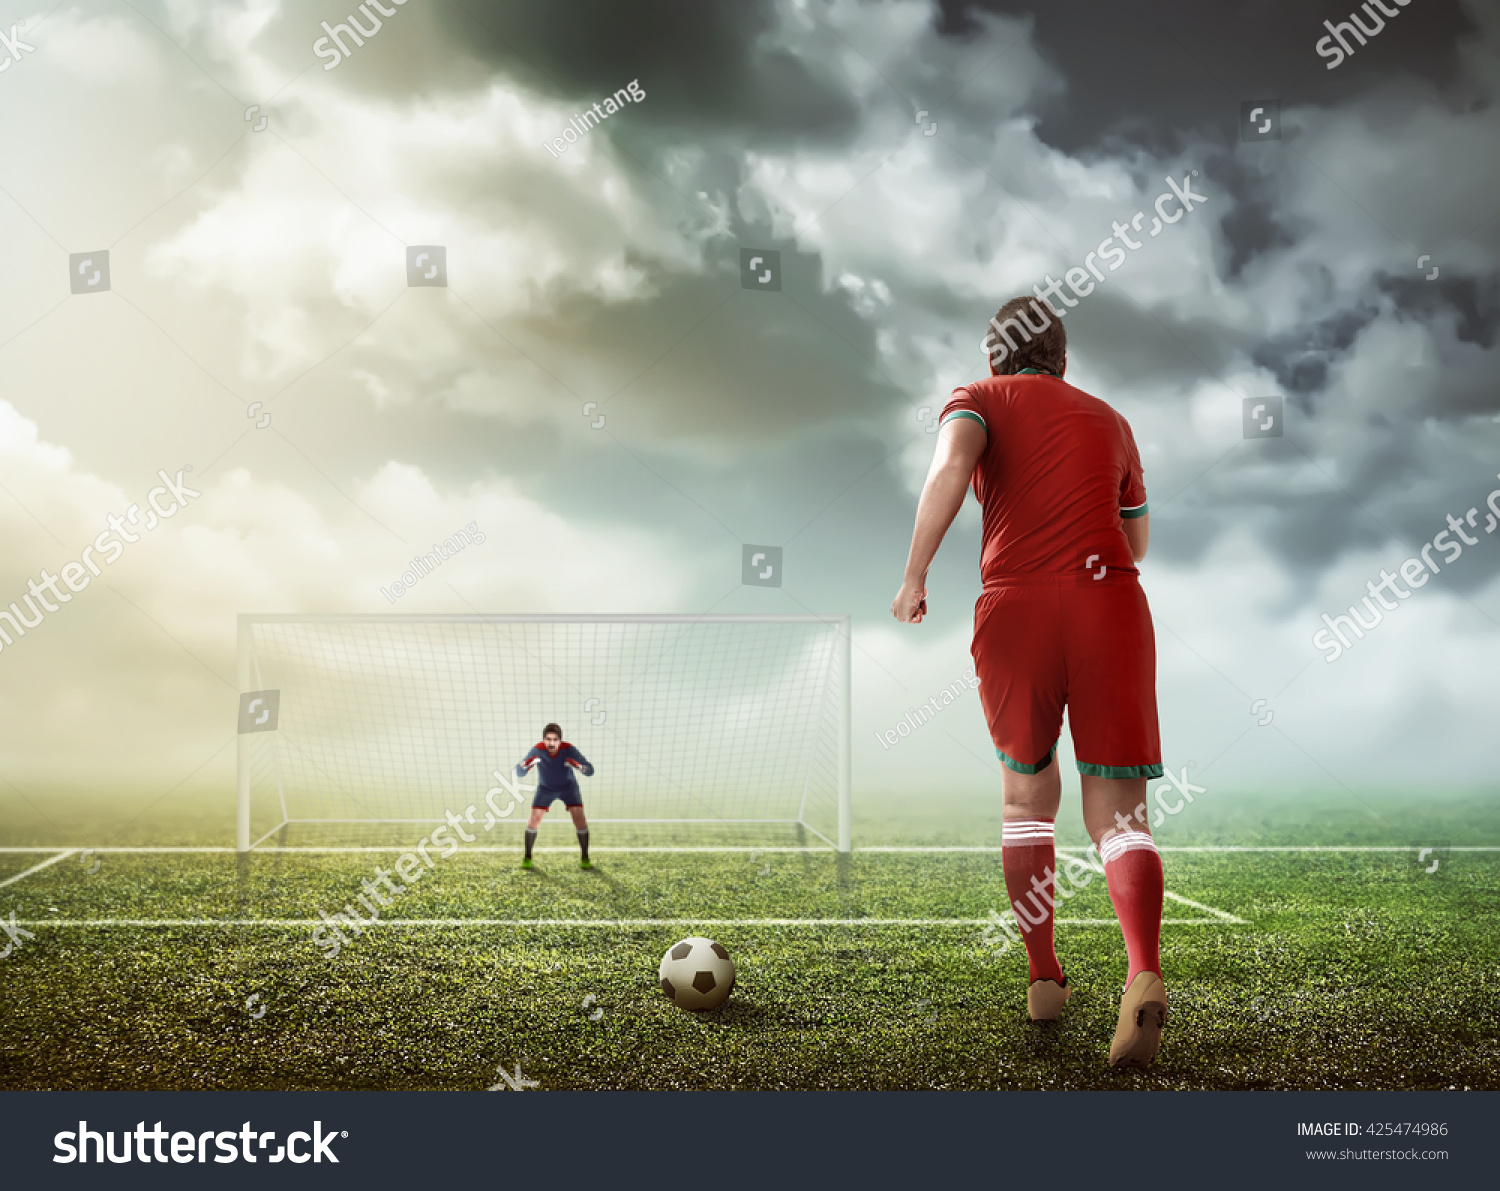 Soccer player ready to execute penalty kick #425474986